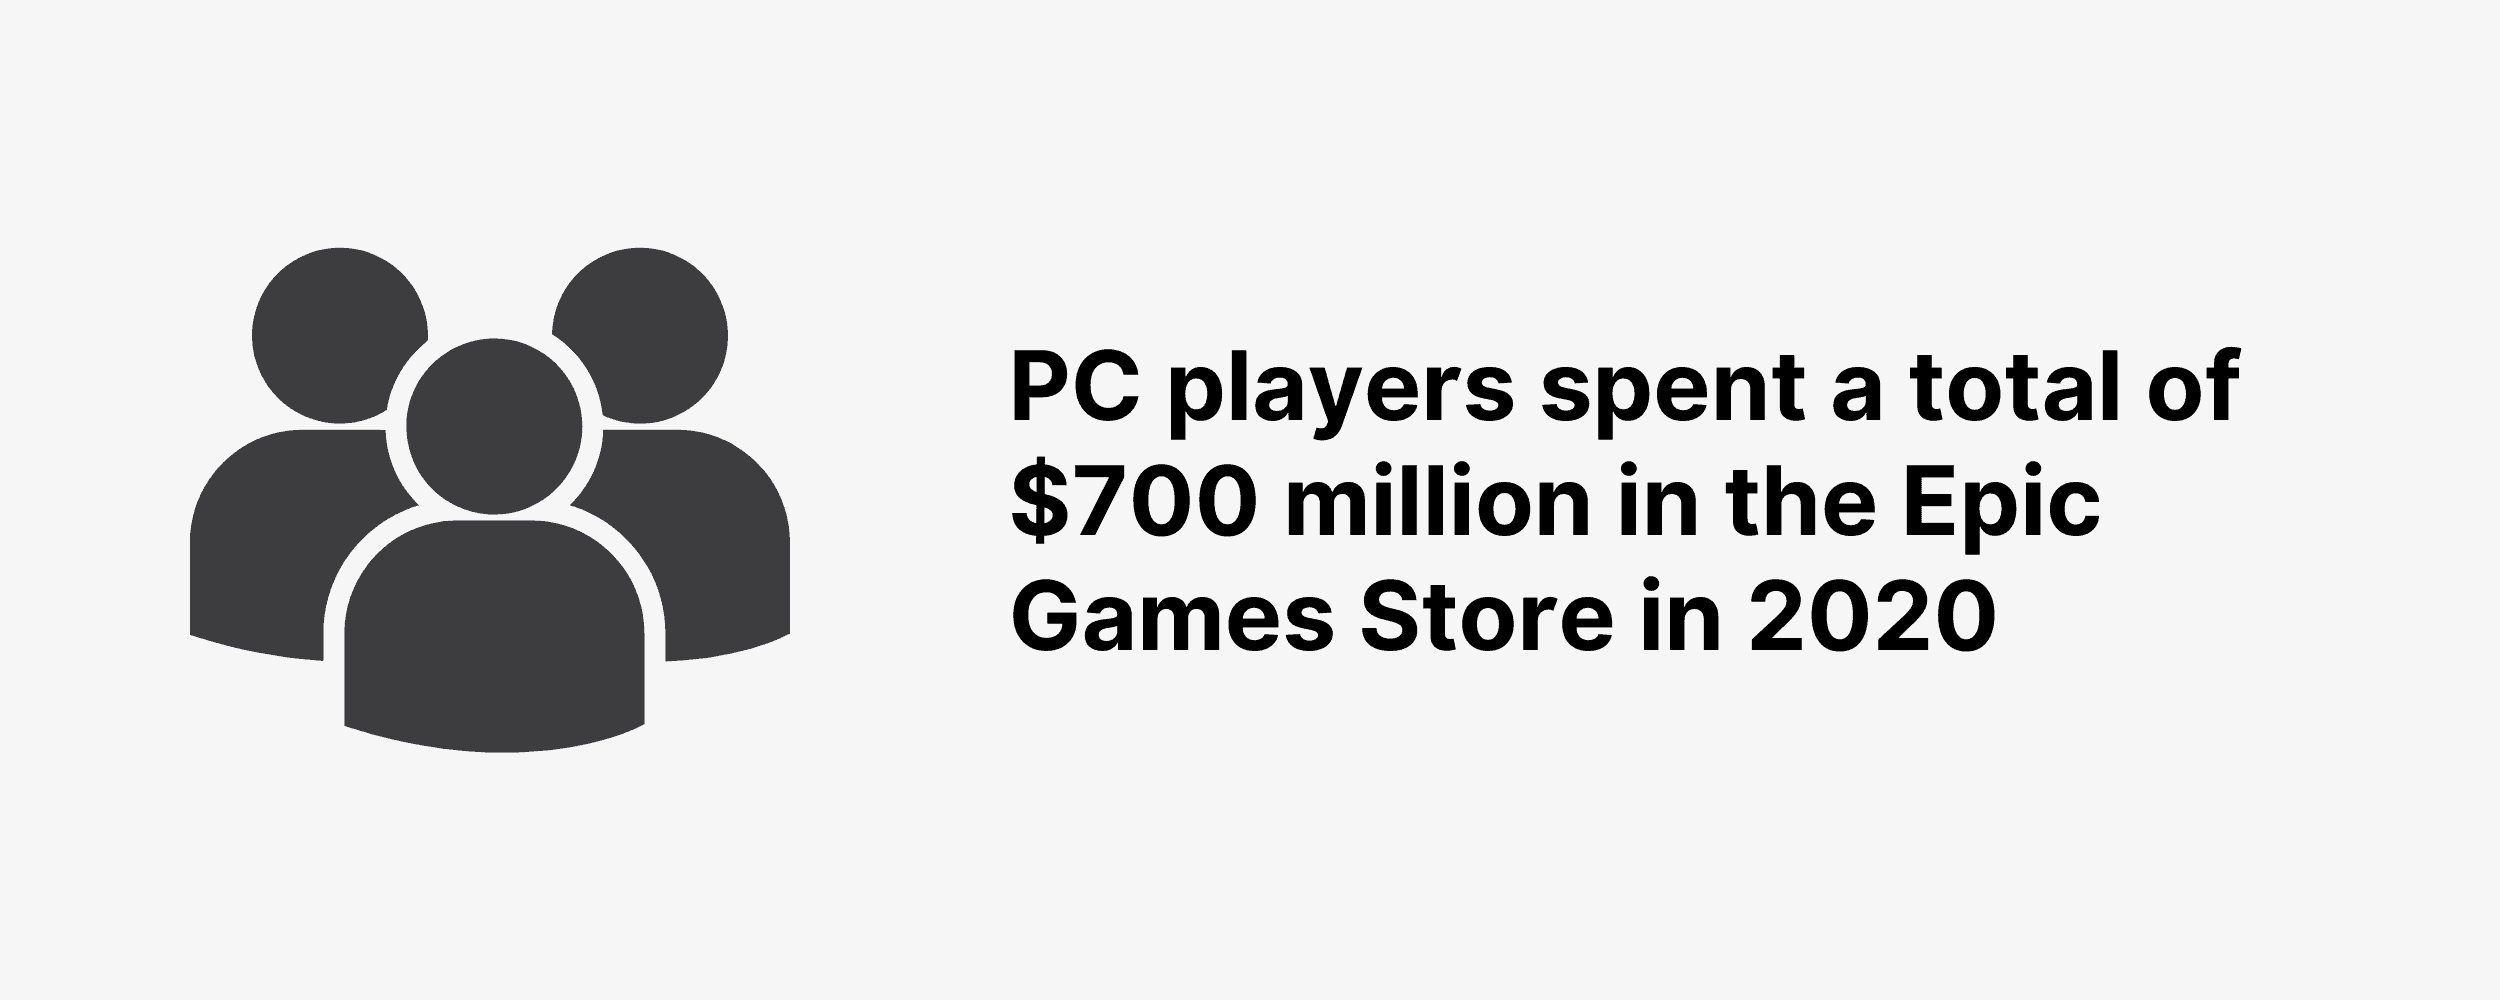 PC players spent a total of $700 million in the Epic Games Store in 2020